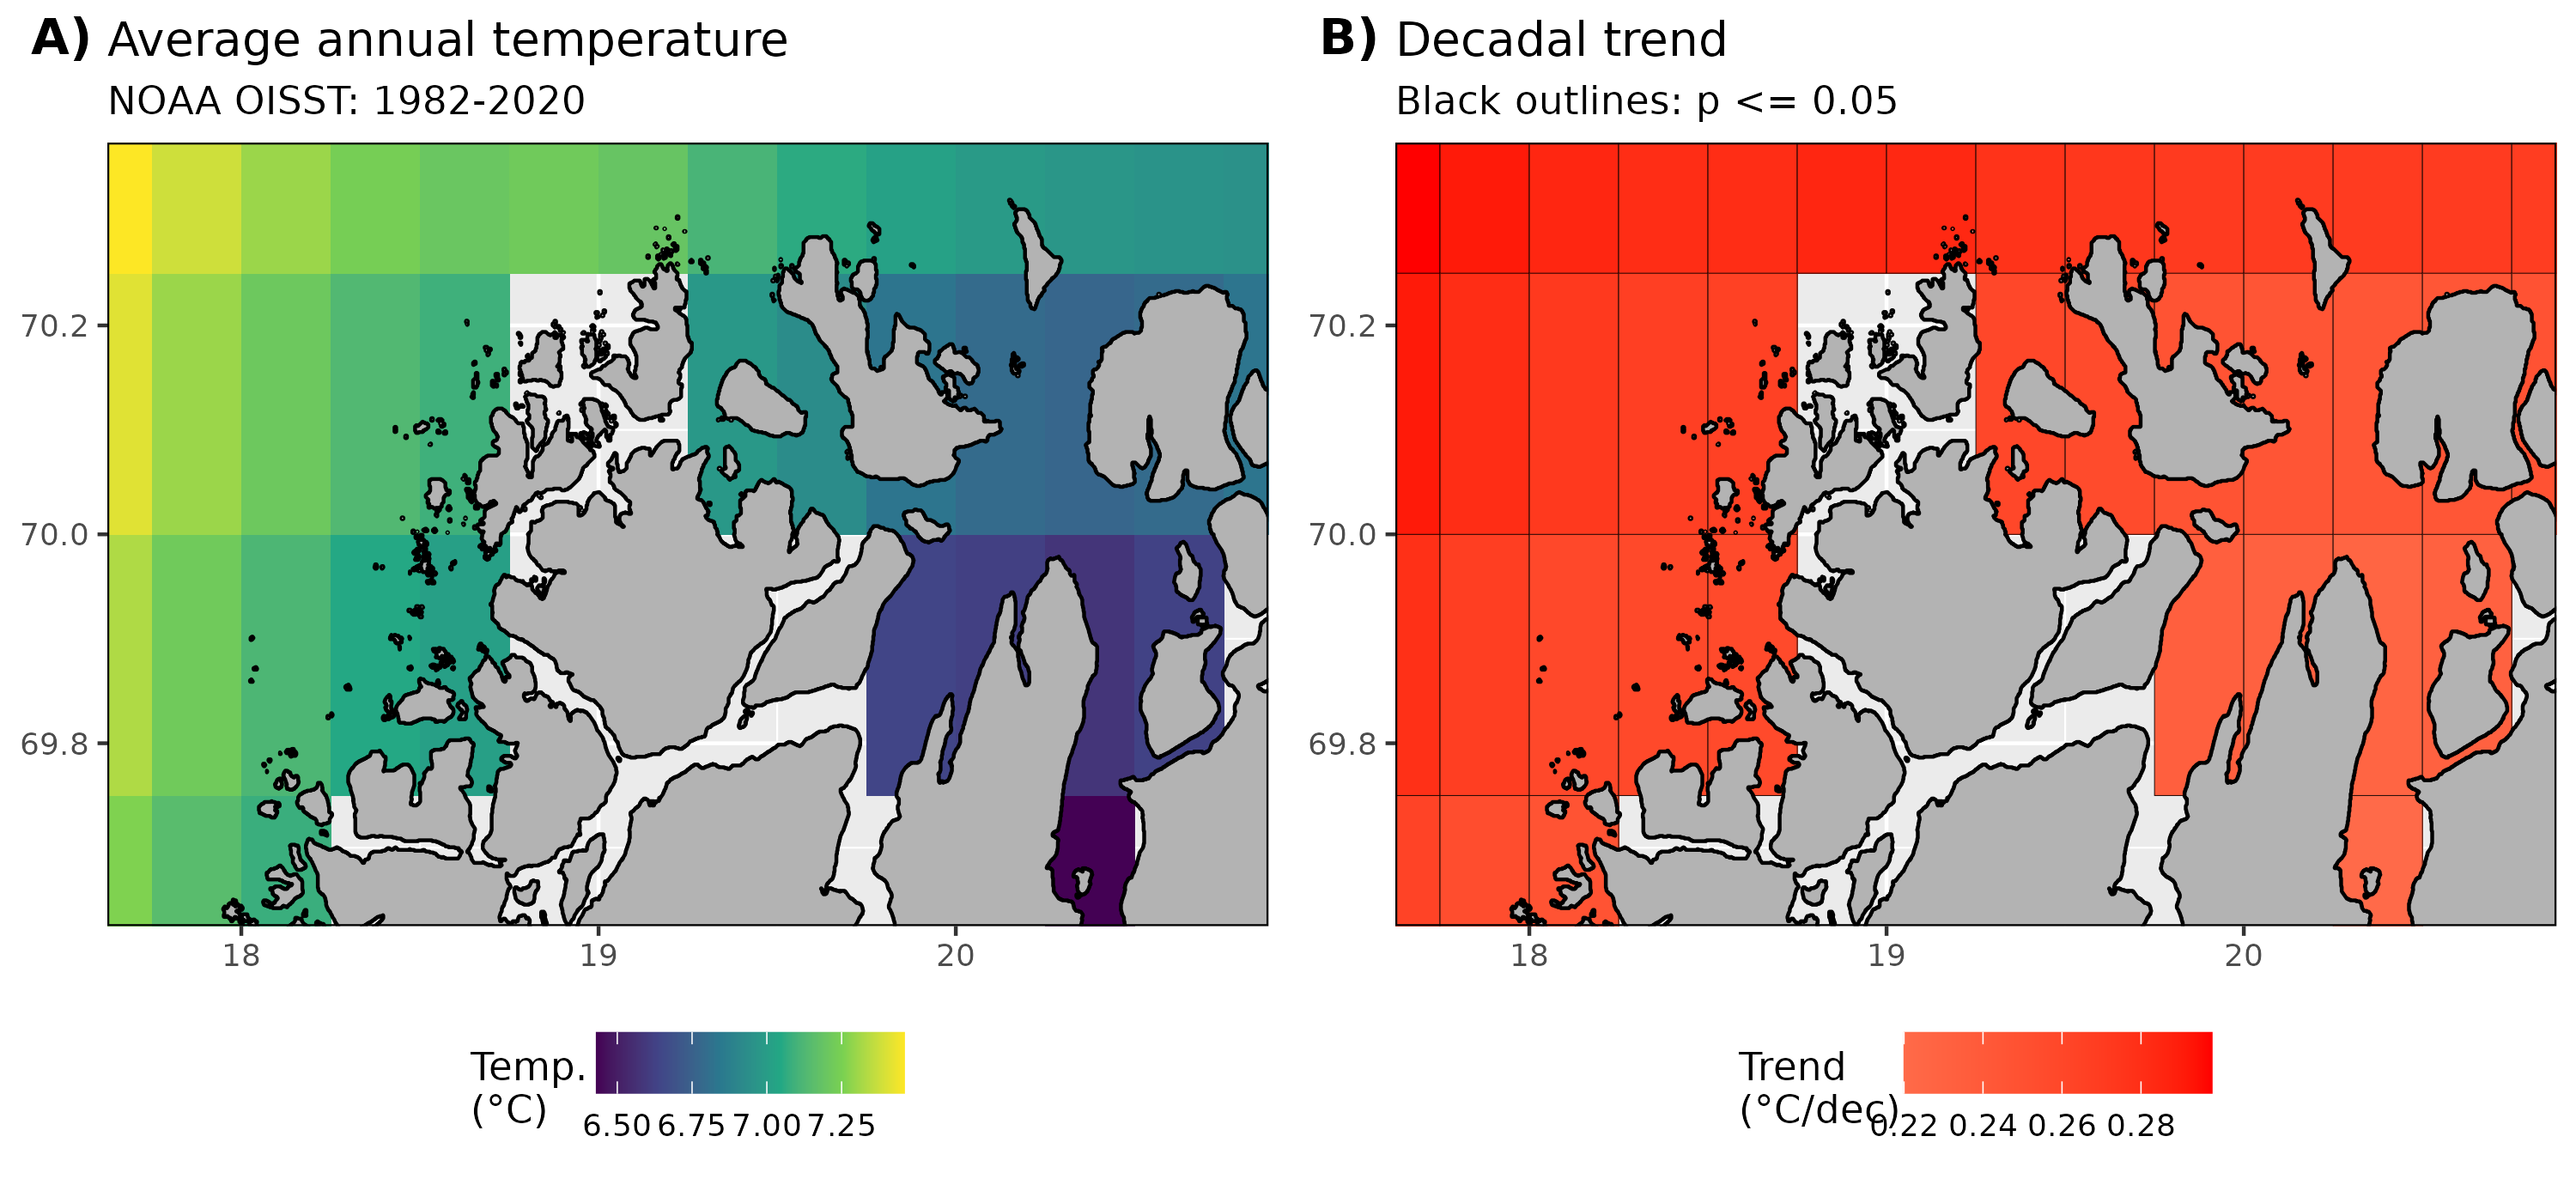 Figure 20: A) Average annual SST from 1982-2020. B) Decadal trends in SST calculated with annual averages from 1982-2020. Pixels with significant trends (p <= 0.05) are framed in black.